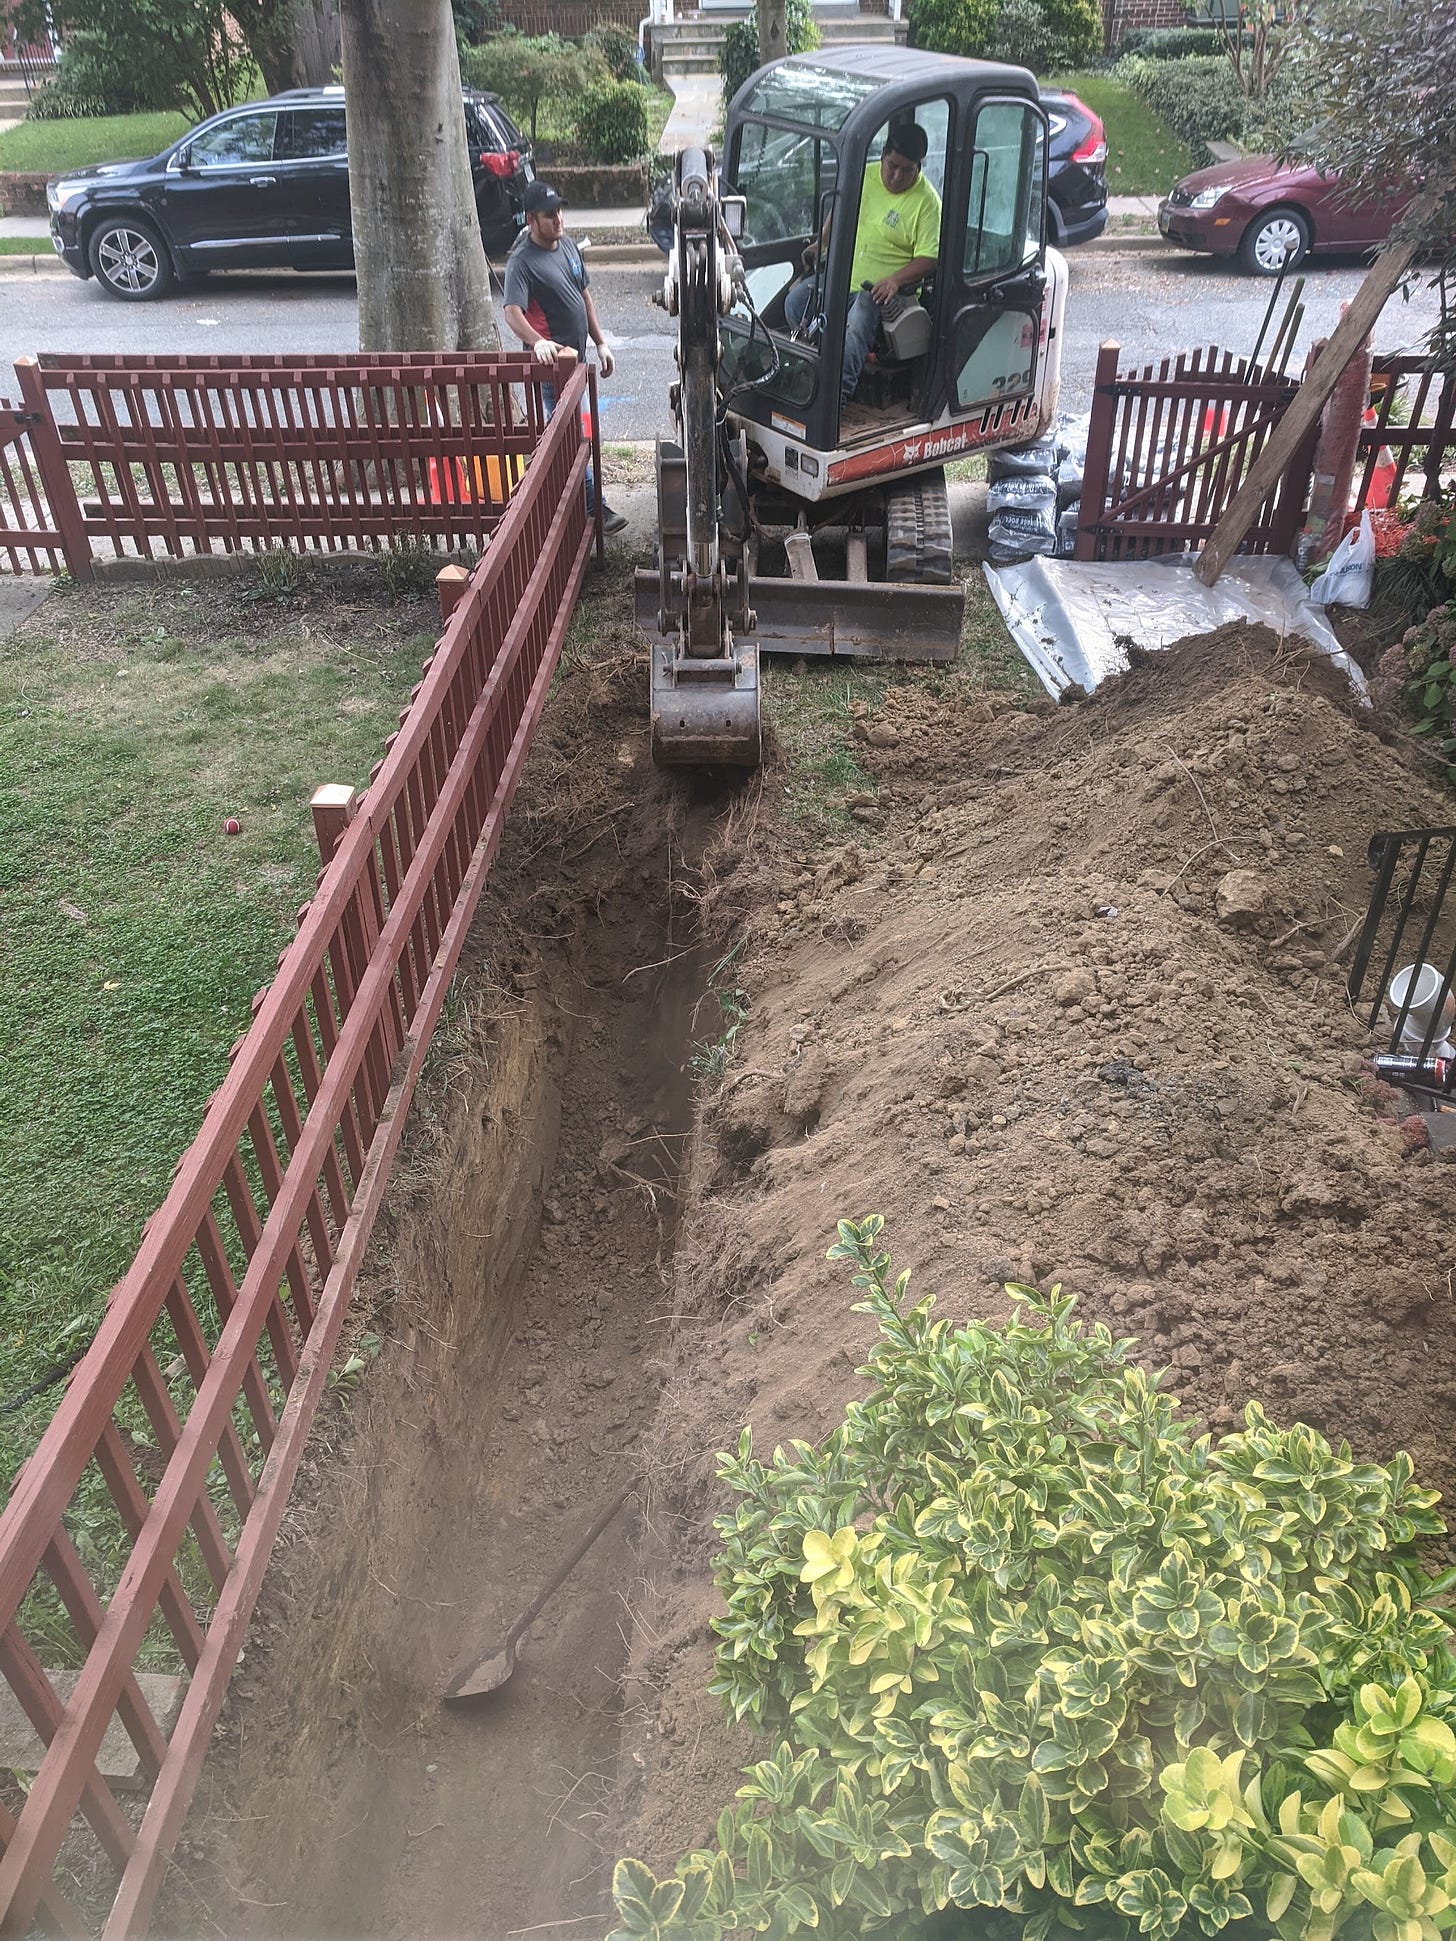 Workers dig a trench in my front yard, obliterating my lawn.